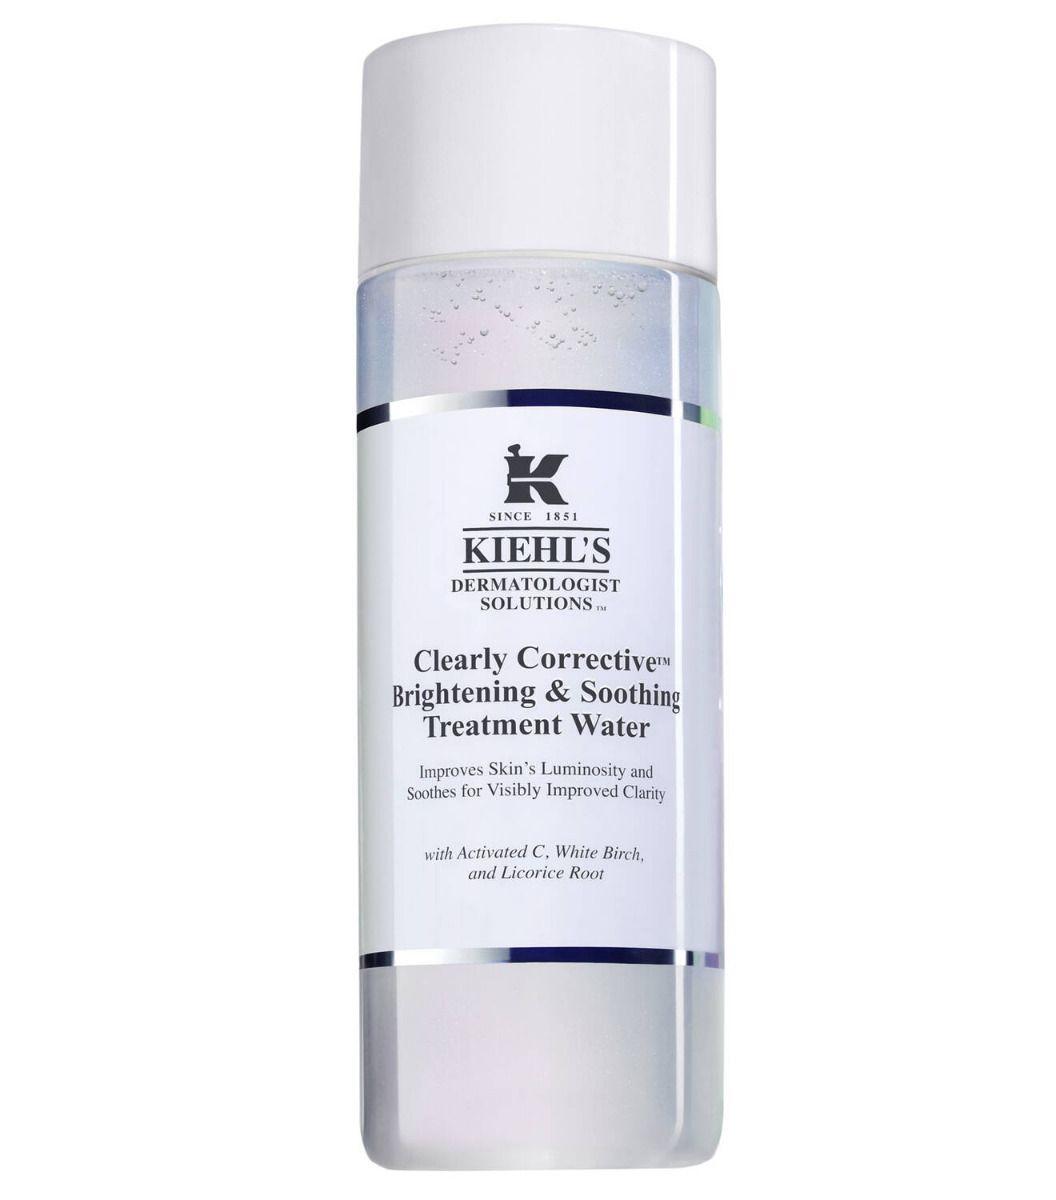 clearly corrective brightening & soothing treatment water